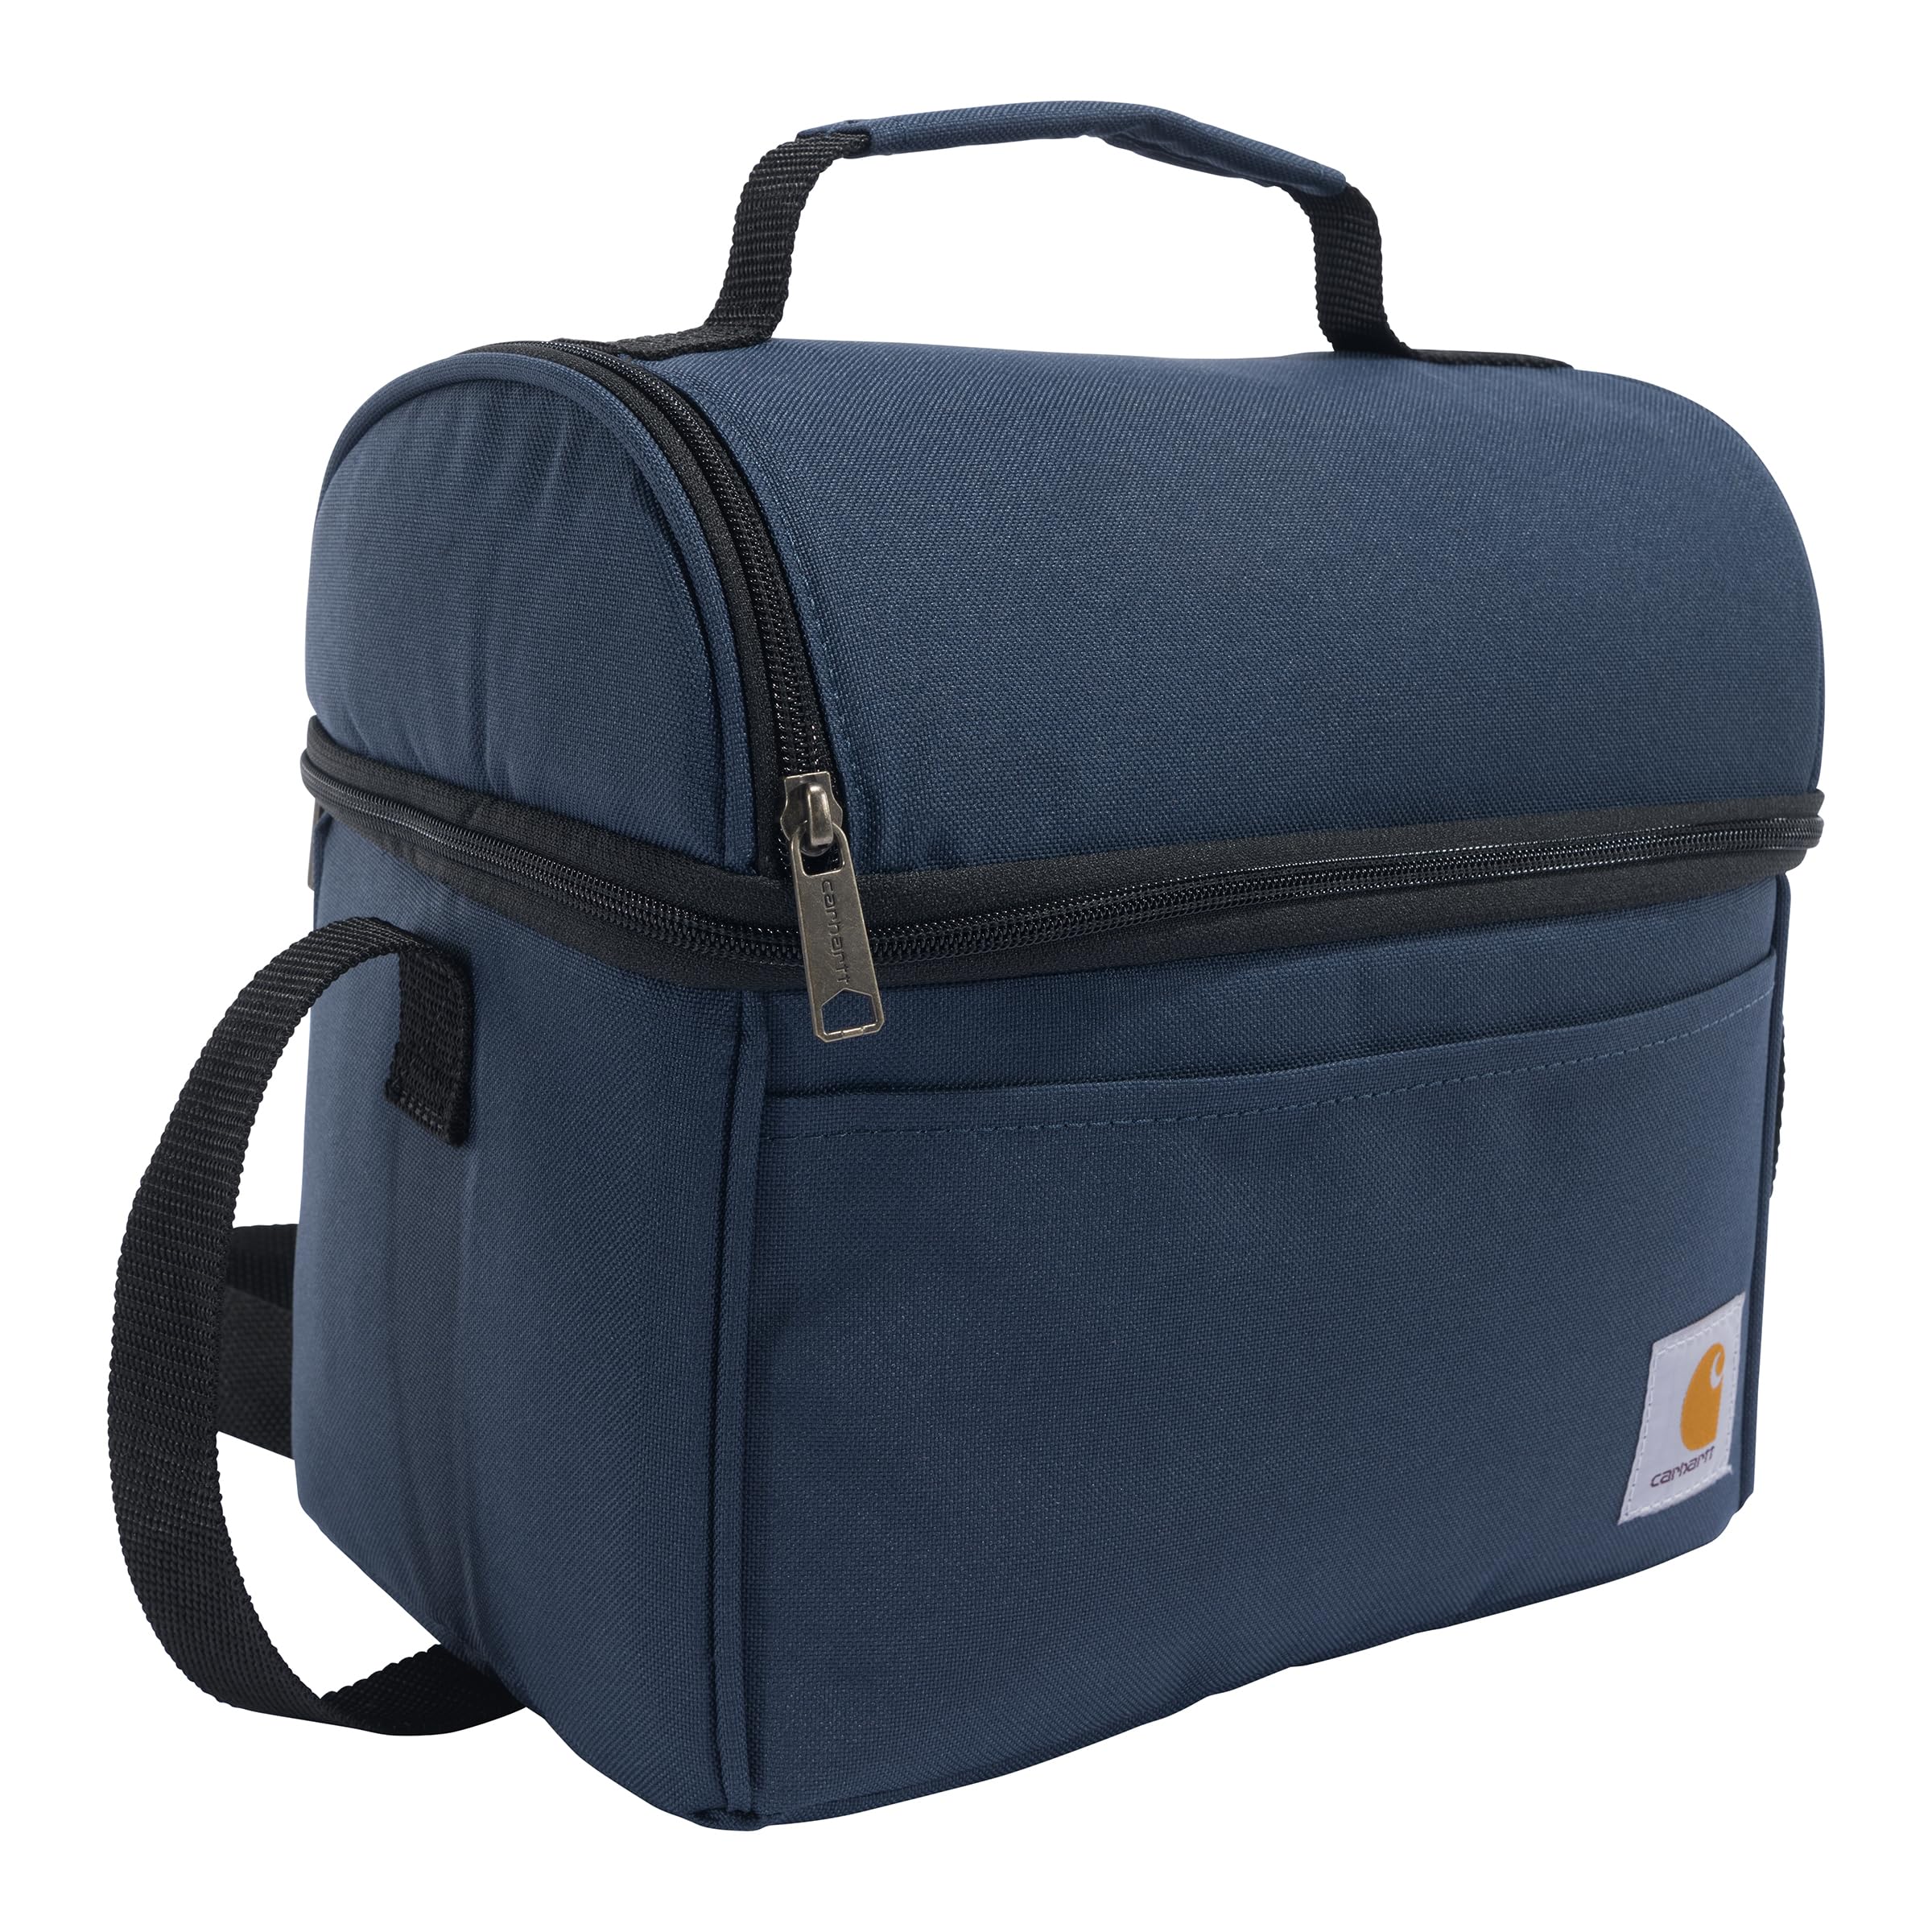 Carhartt Deluxe Dual Compartment Insulated Lunch Cooler Bag, Navy - image 4 of 7